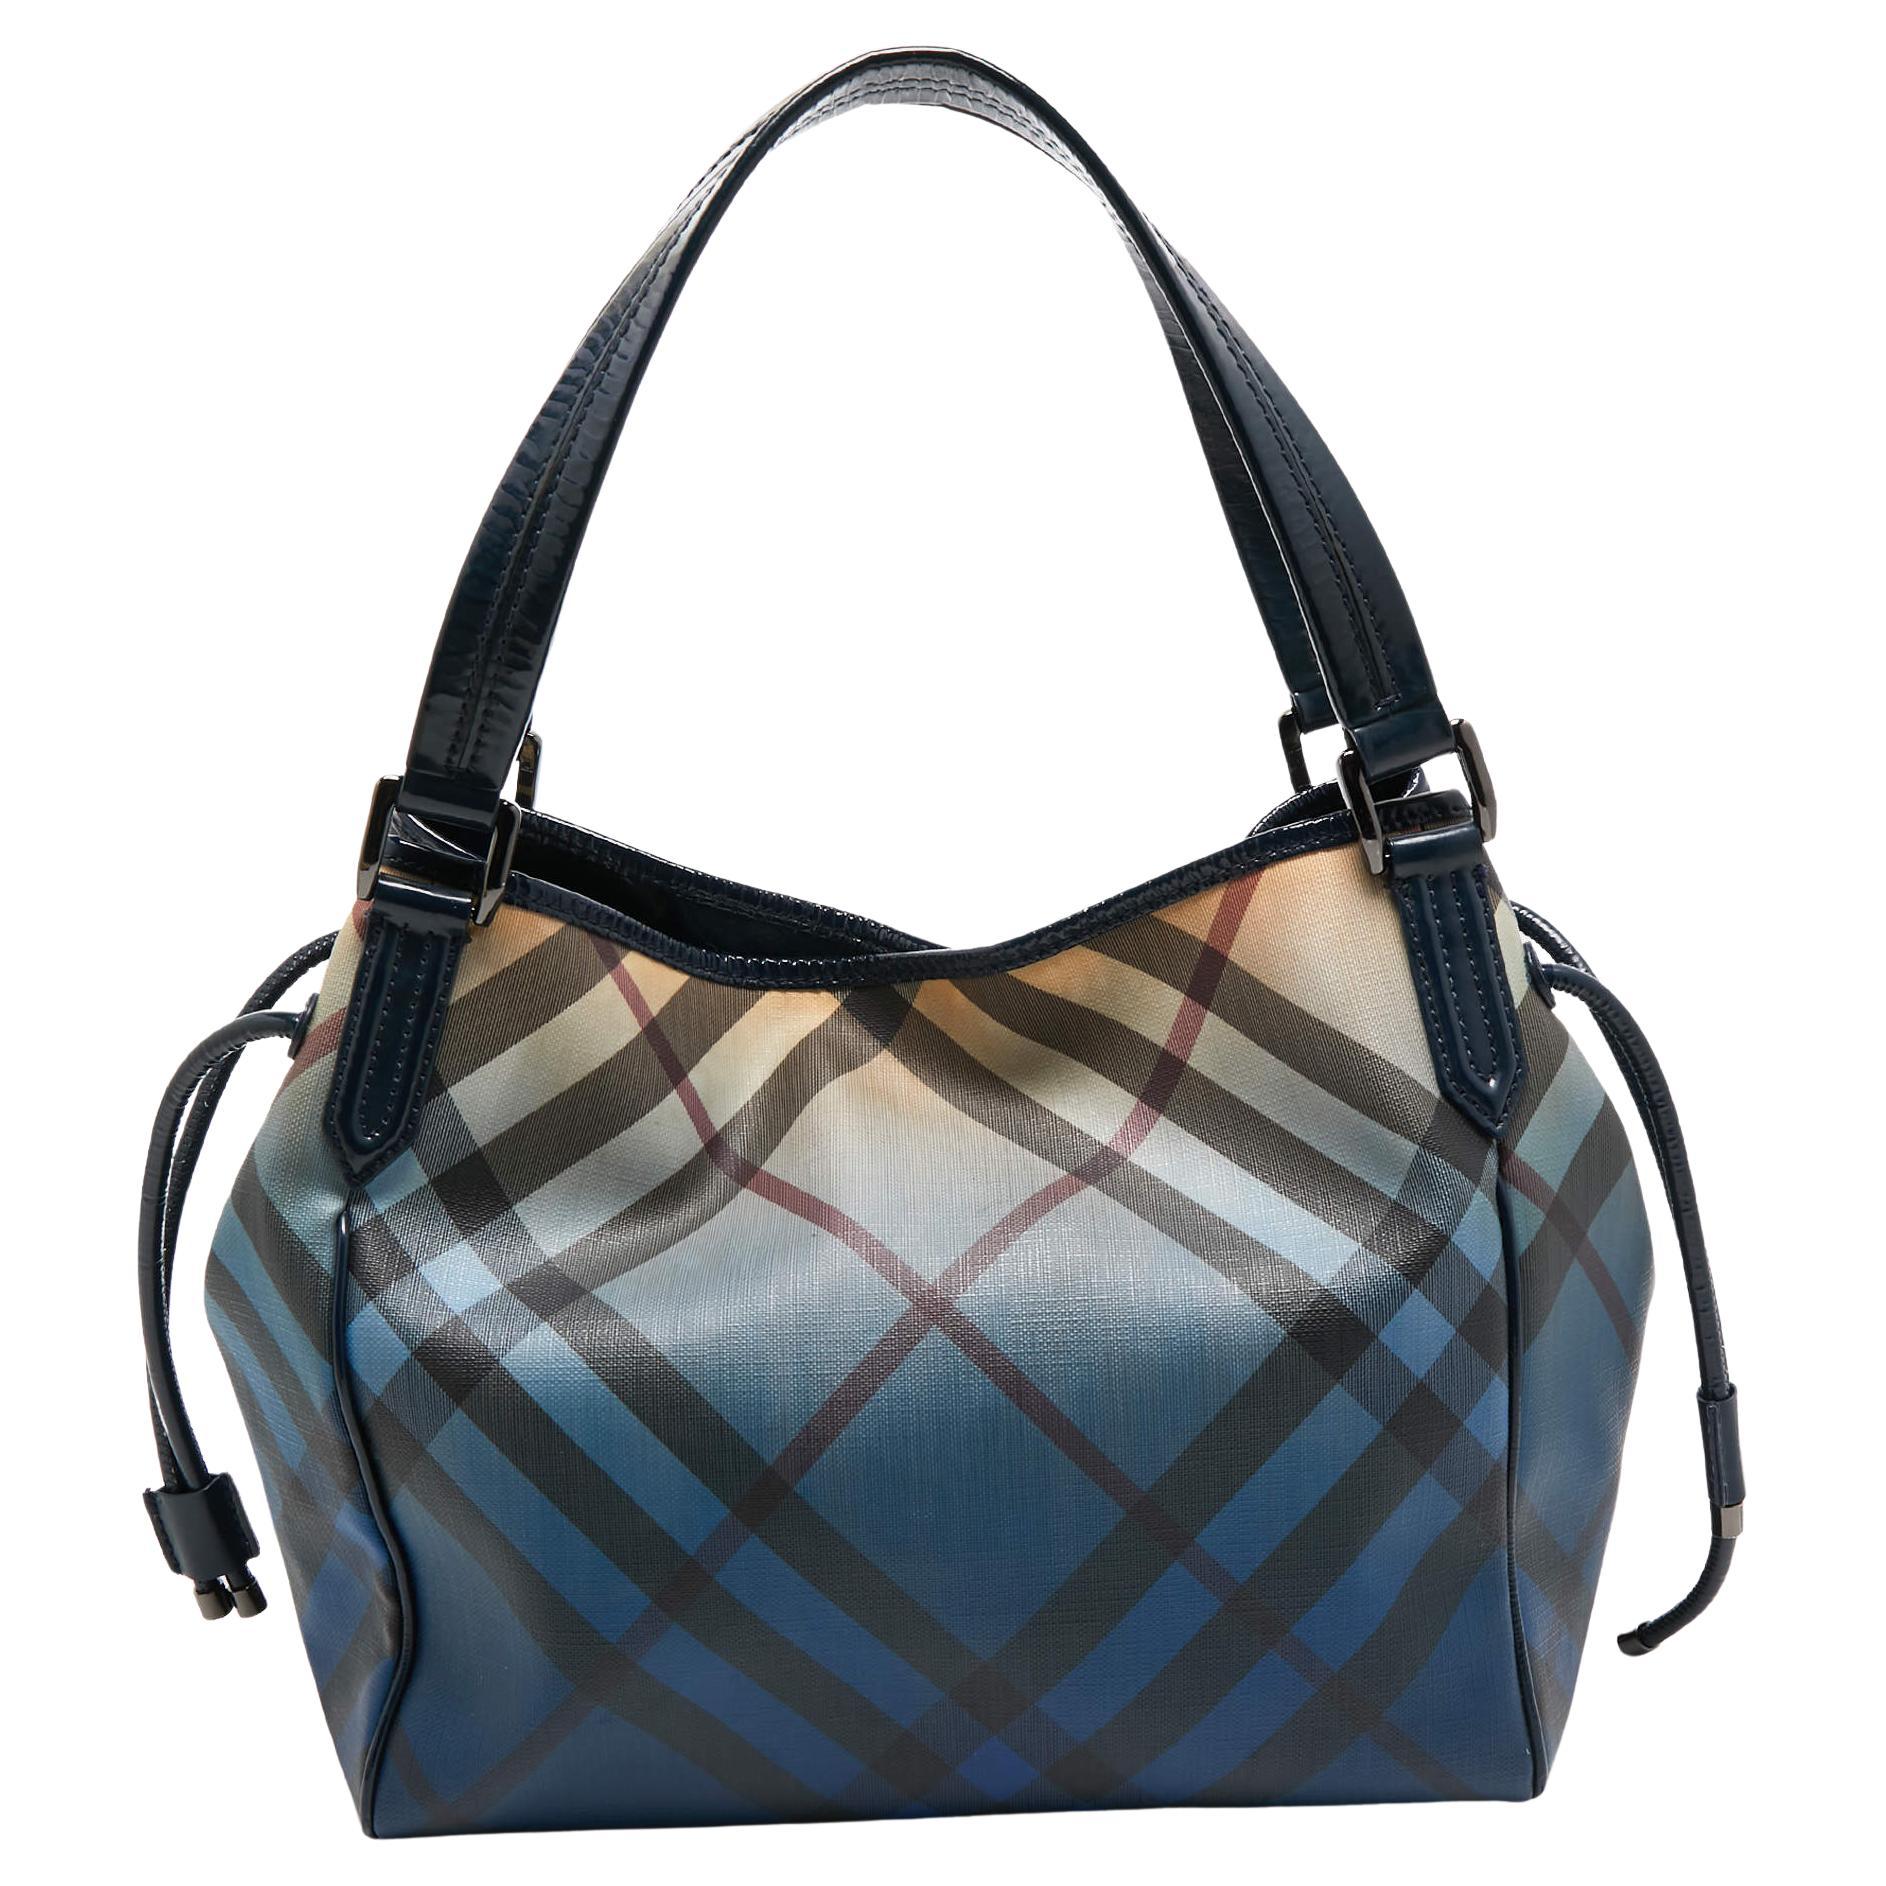 Burberry Navy Blue/Beige Ombre PVC and Patent Leather Biltmore Tote For Sale